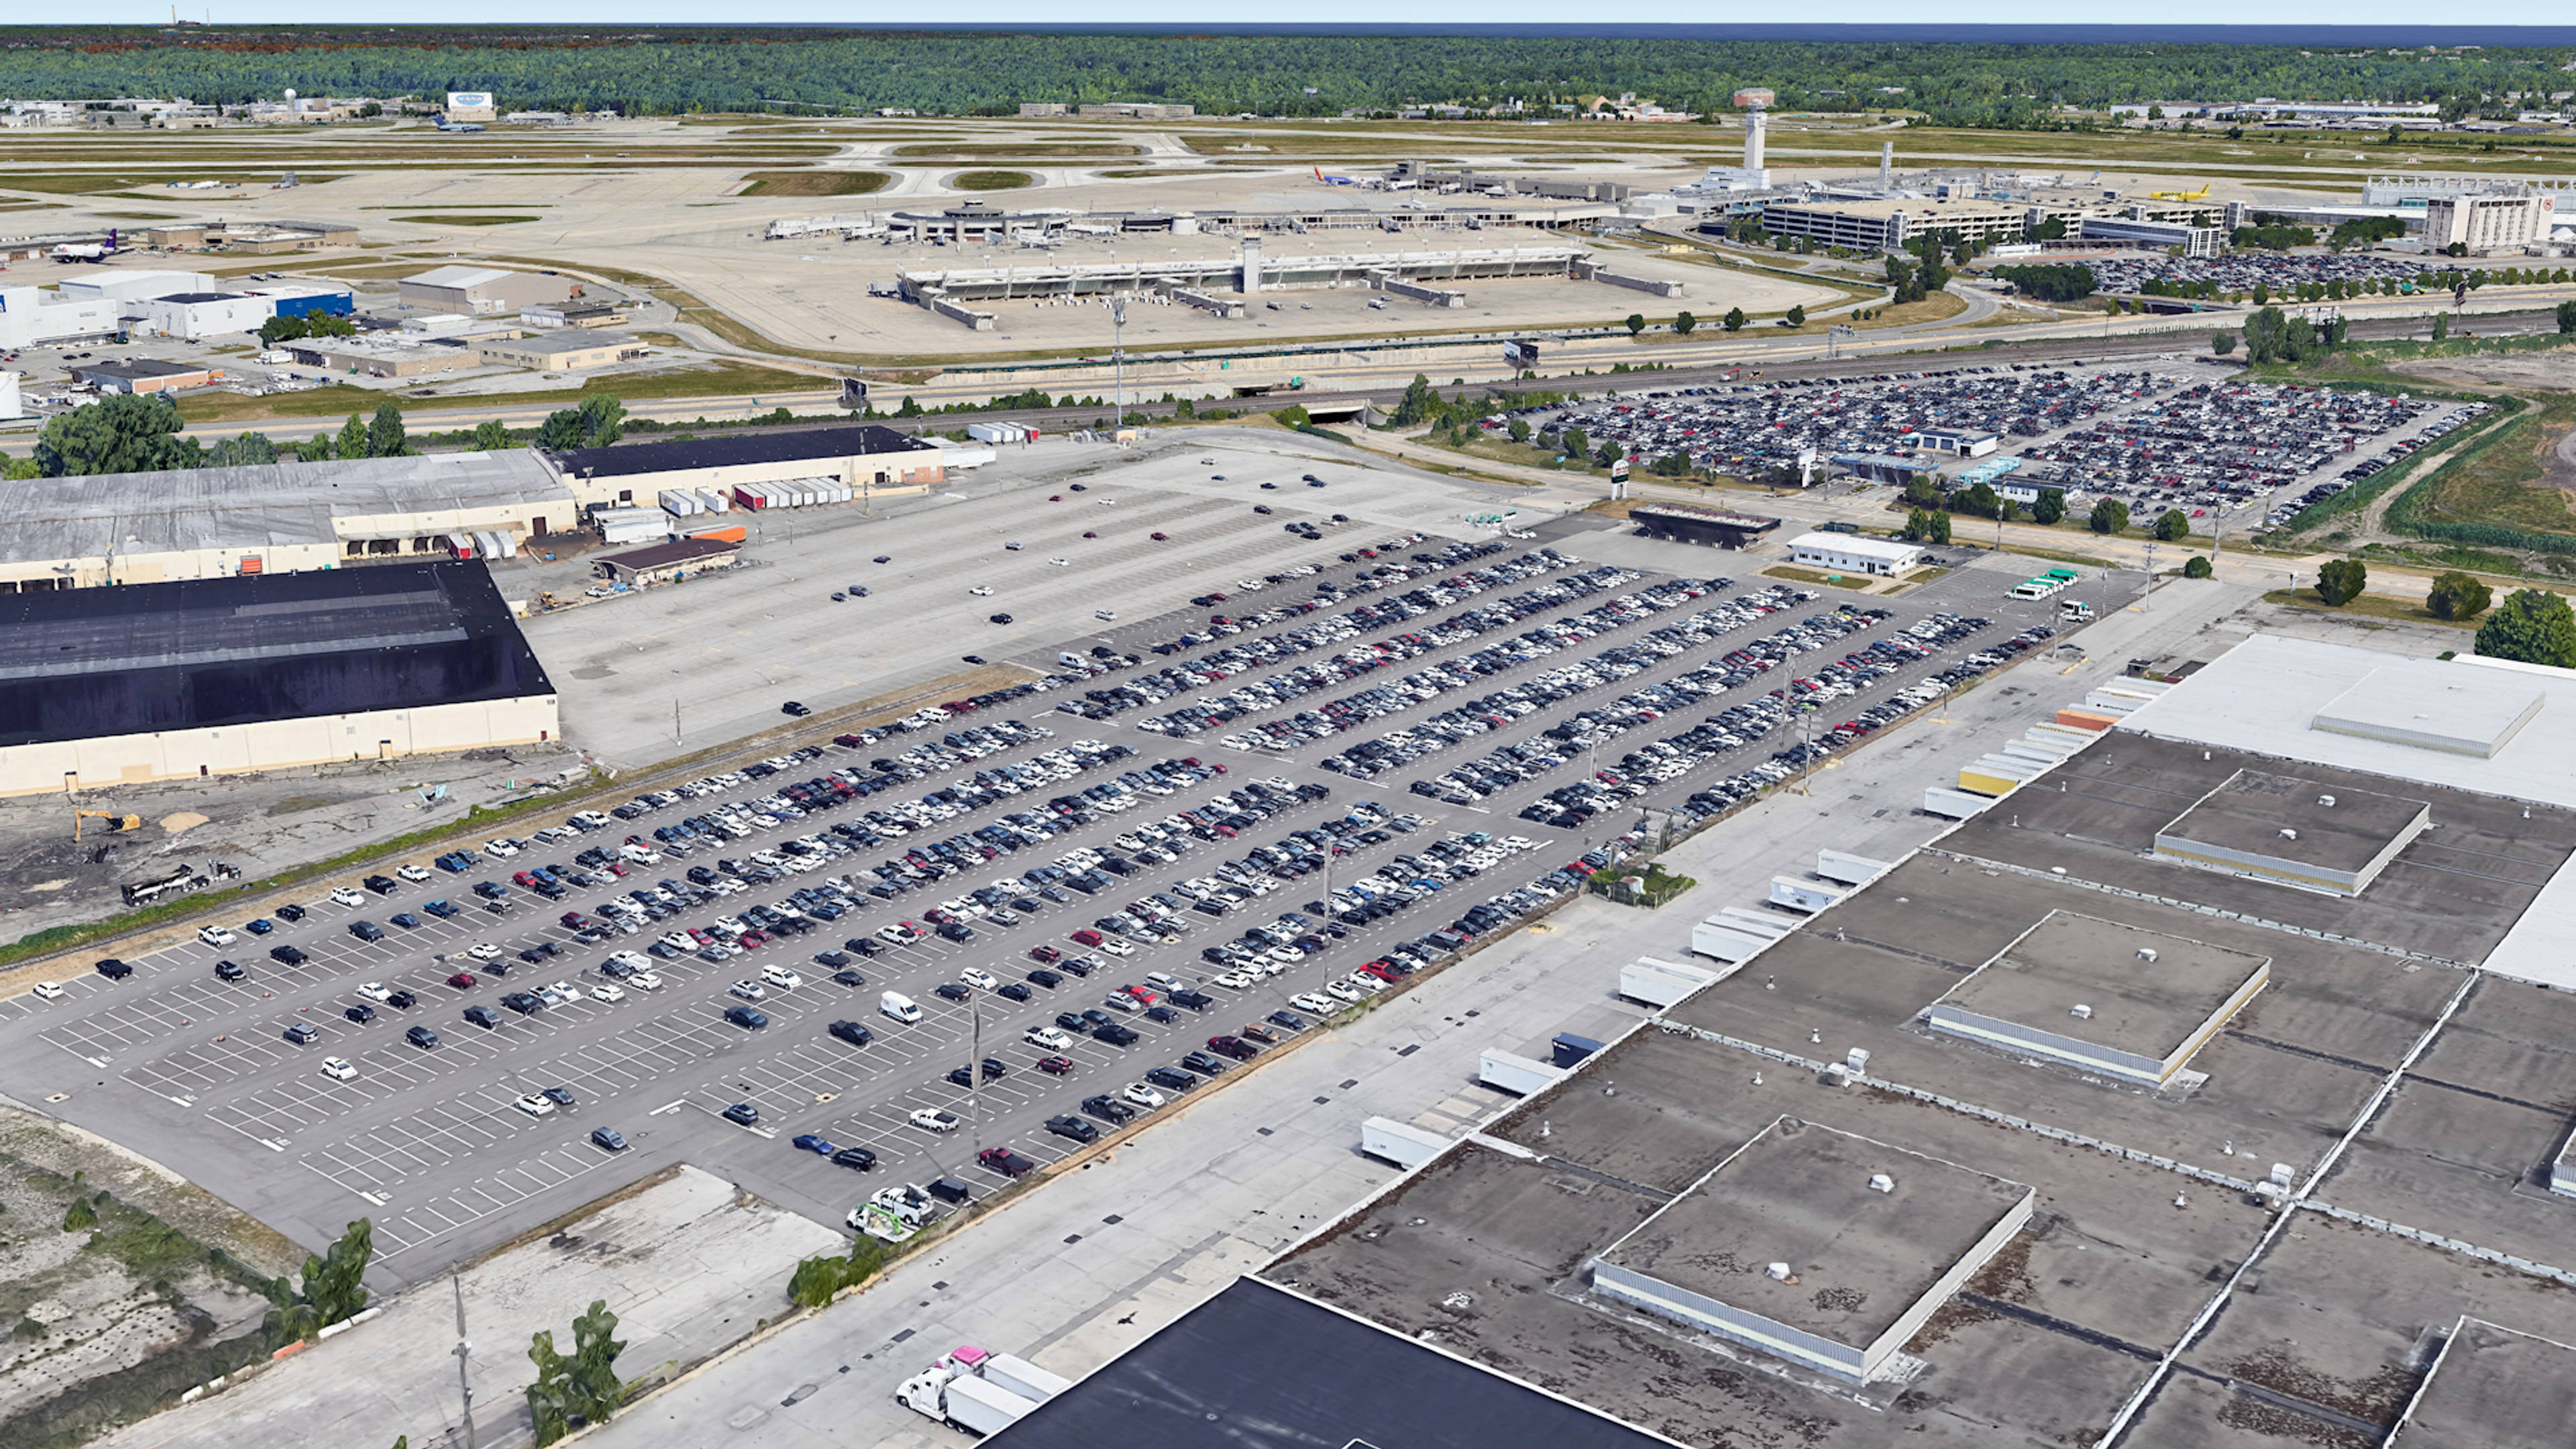  Aerial View of Cleveland Airport Parking